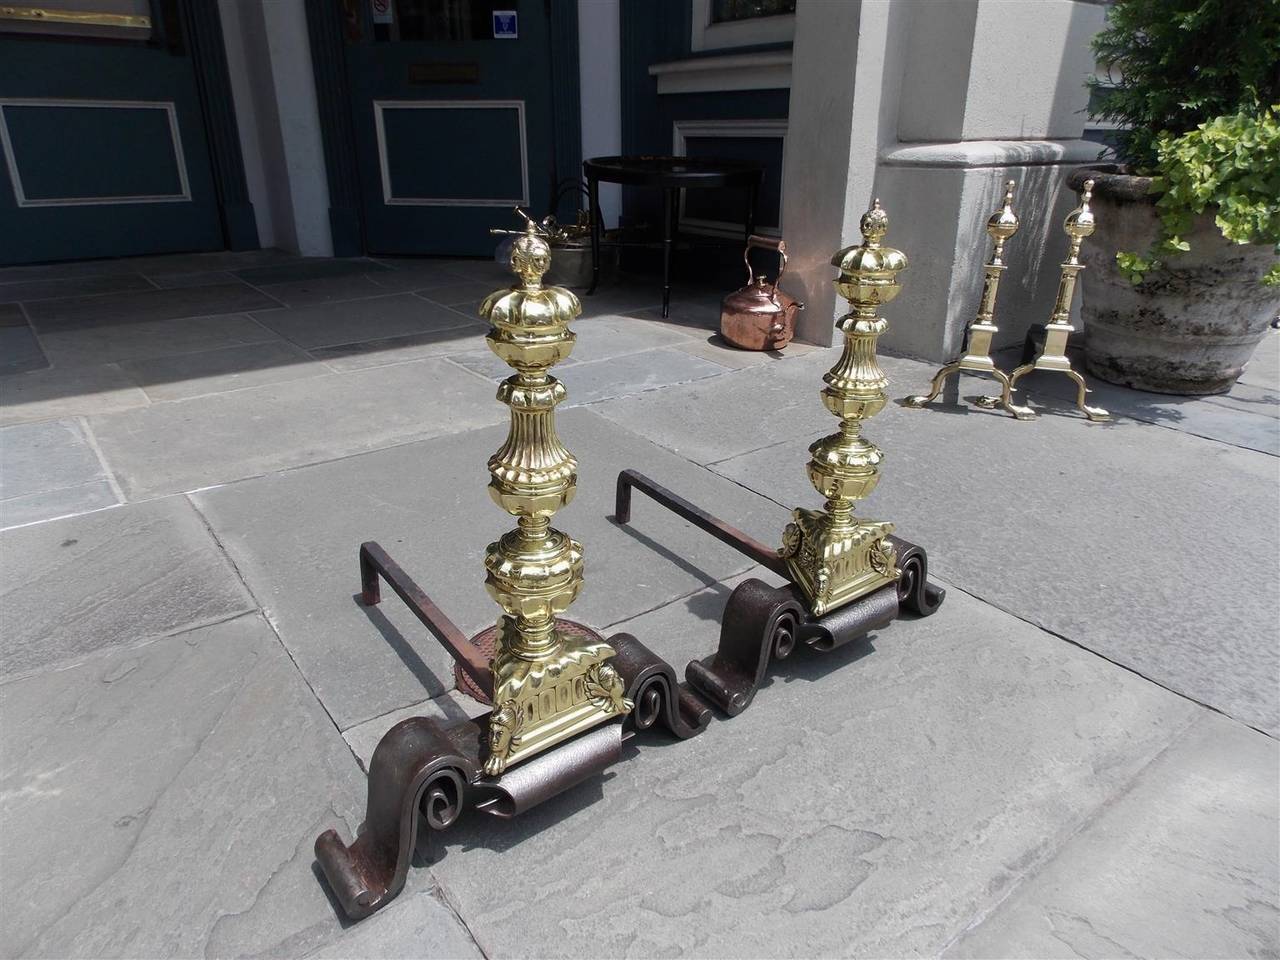 Pair of English brass and wrought iron andirons with hand chased faces on a fluted finial top, bulbous fluted centered column, triangular plinths with chased faces and lions paw motif and terminating on scrolled wrought iron legs, Mid-18th century.